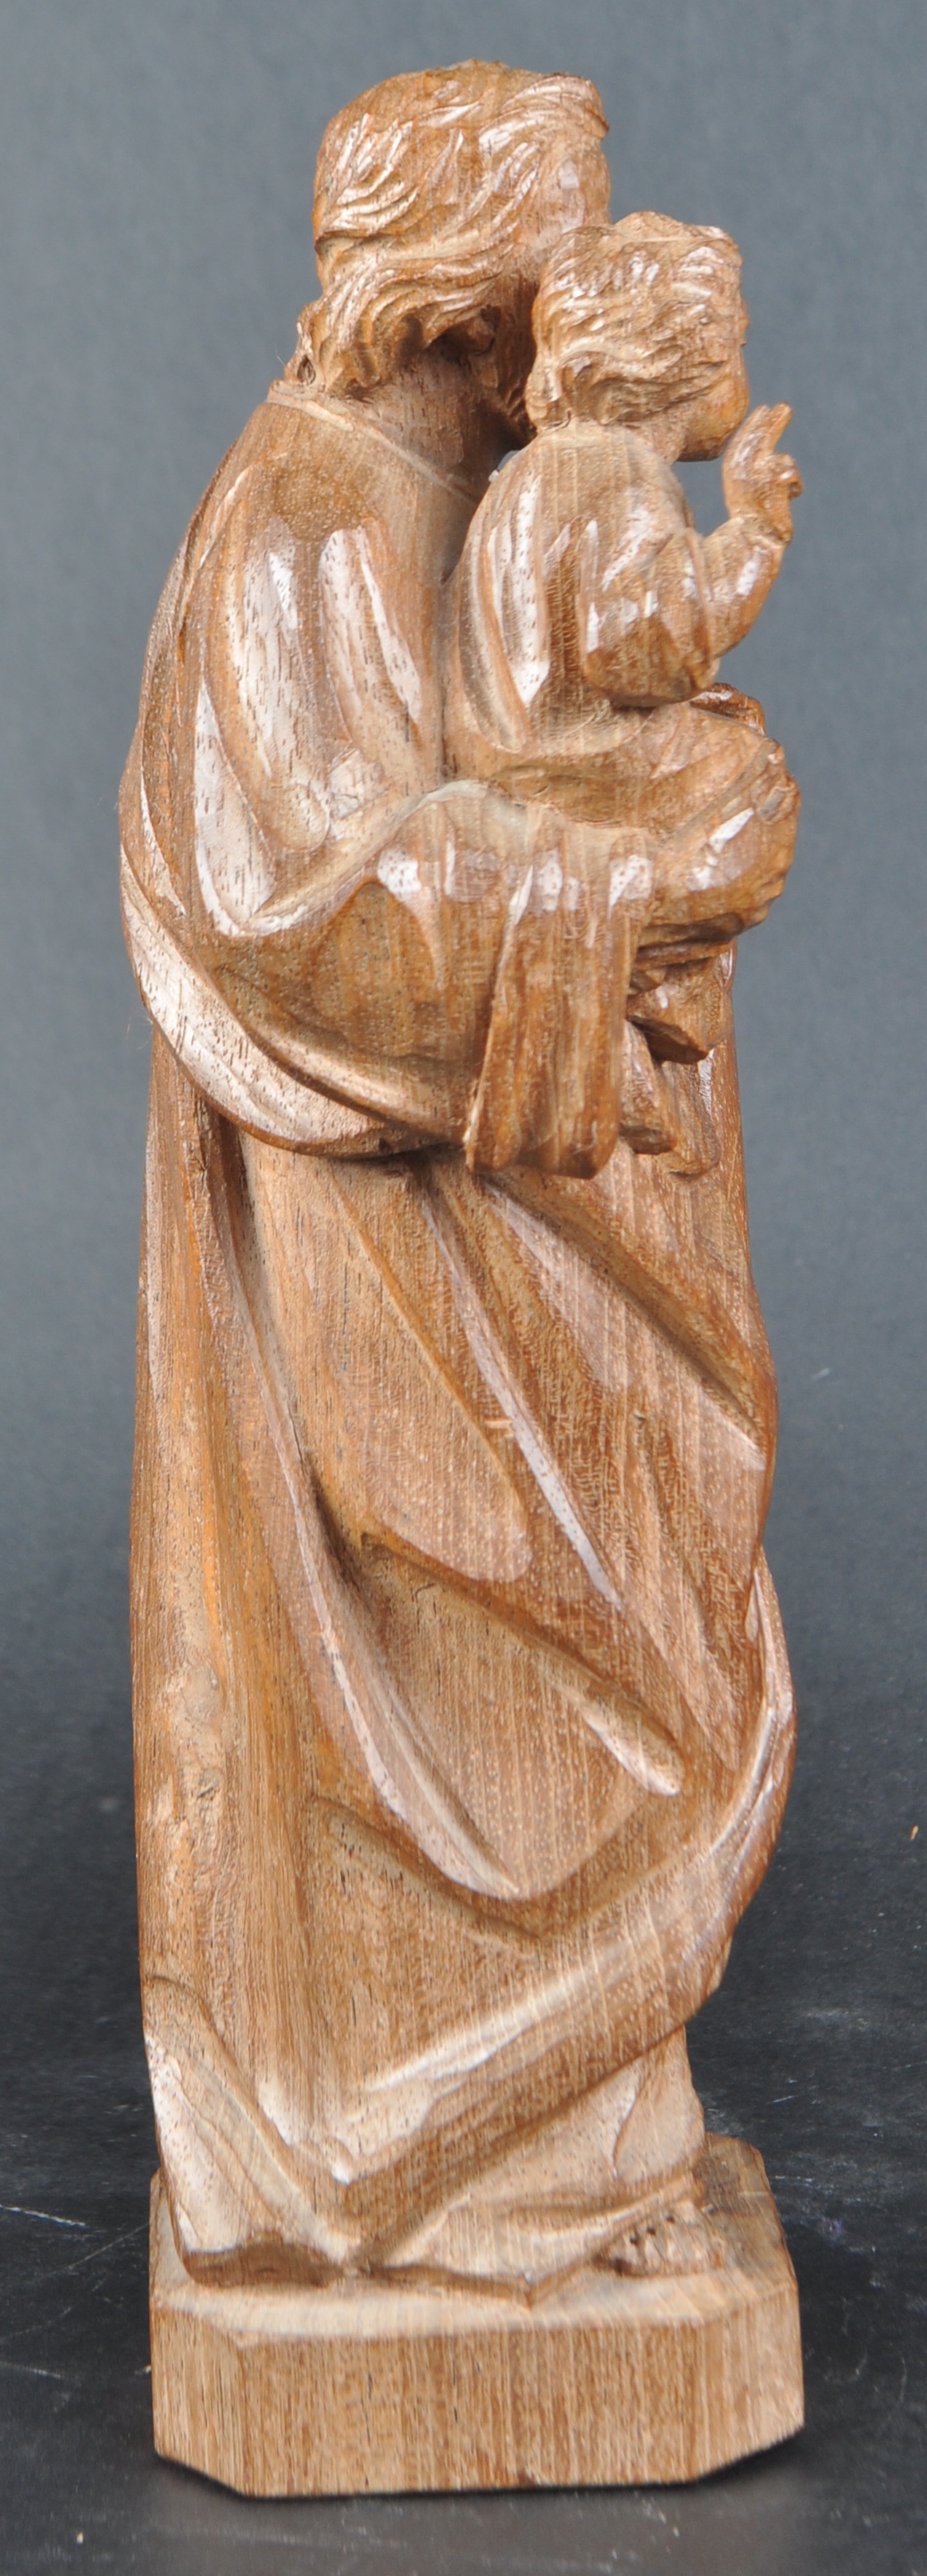 19TH CENTURY HAND CARVED FIGURE OF ST JOSEPH - Image 4 of 5